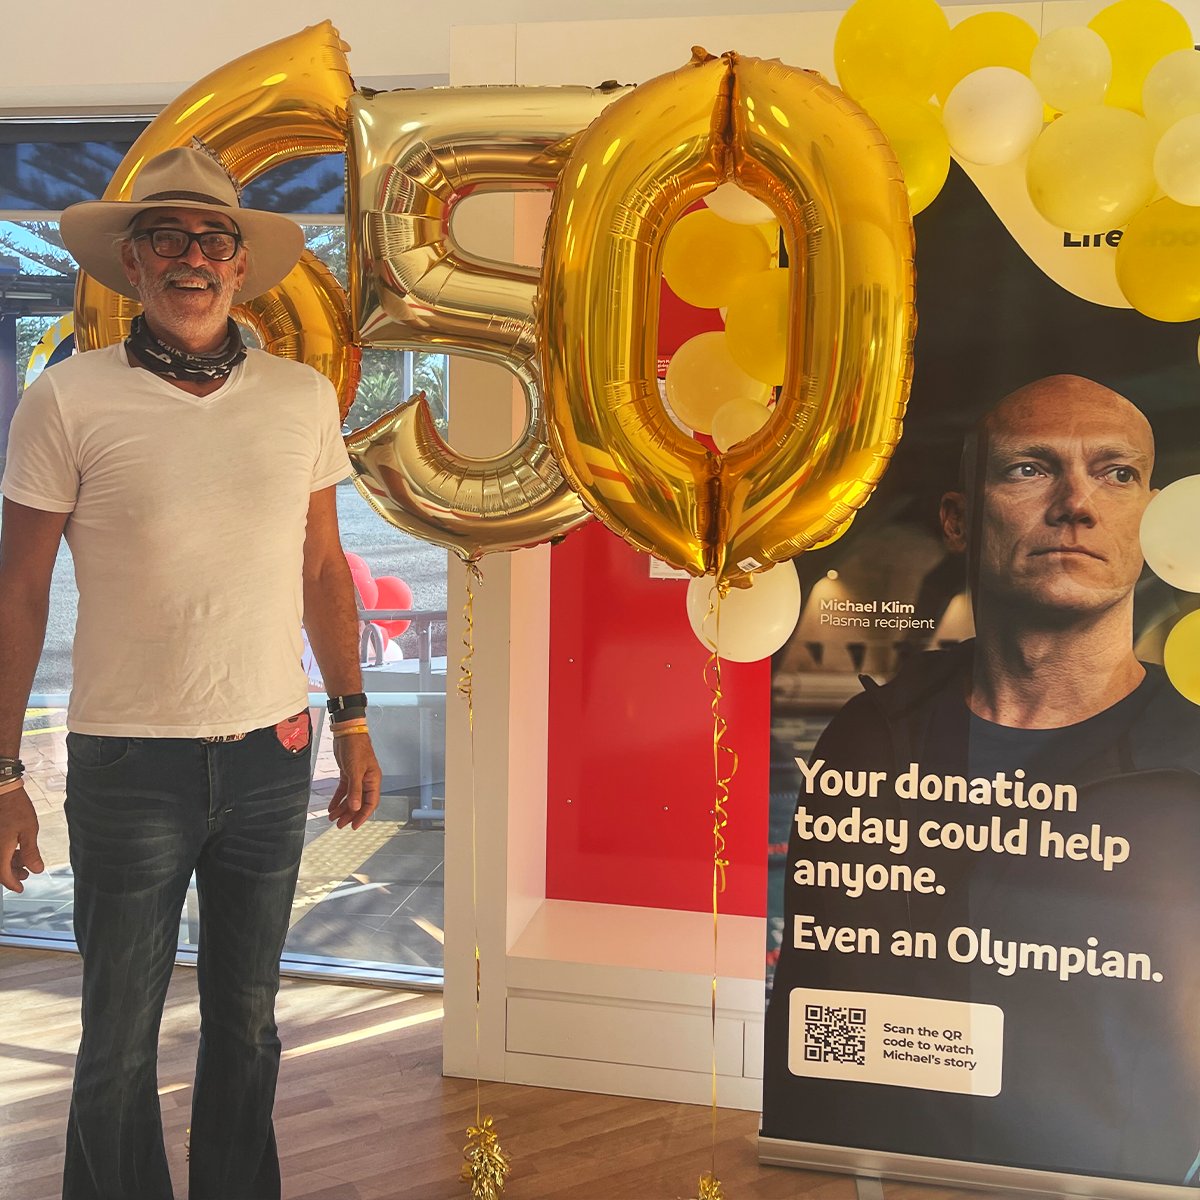 'When I turned 18, my aunt who had 40 donations up her sleeve said I’d probably be too scared to donate plasma. Challenge accepted and here we are at 650 donations,' said Bruce. Donating plasma costs nothing but some time, which Bruce can attest is well-spent. #lifebloodau